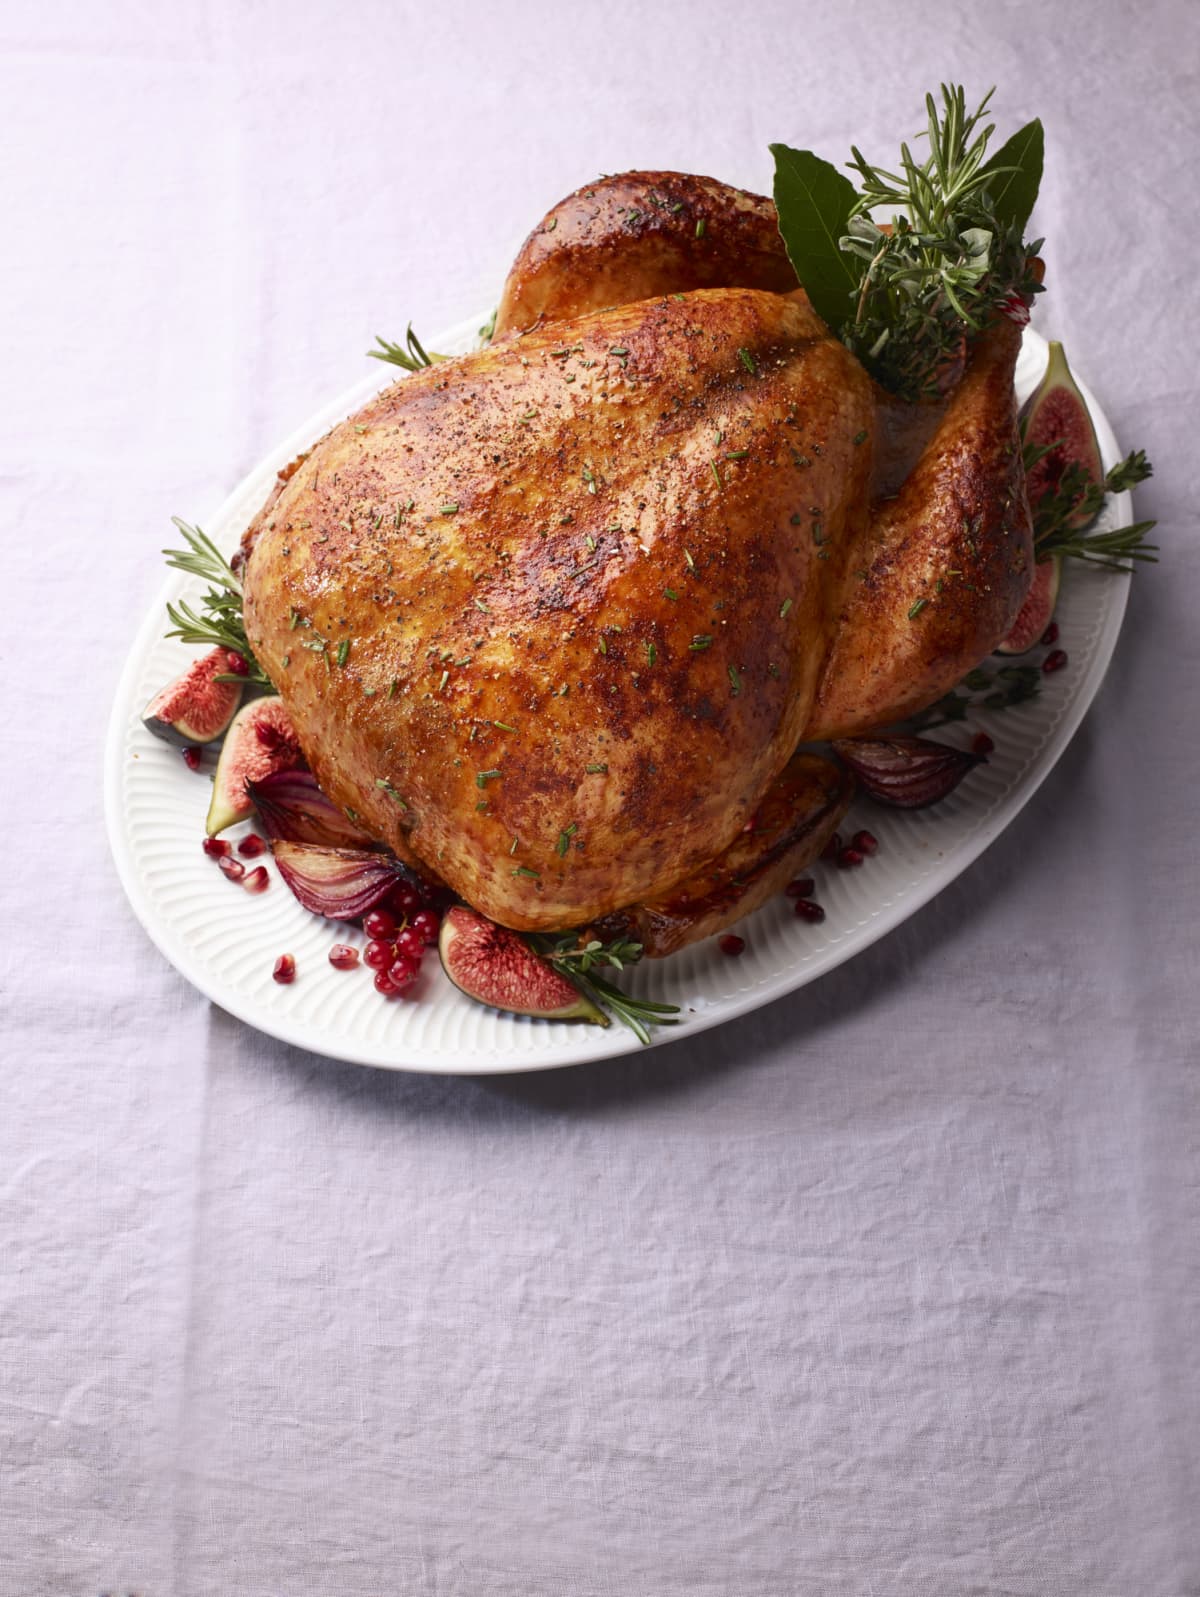 Roast turkey with rosemary, red onions, figs, and red berries